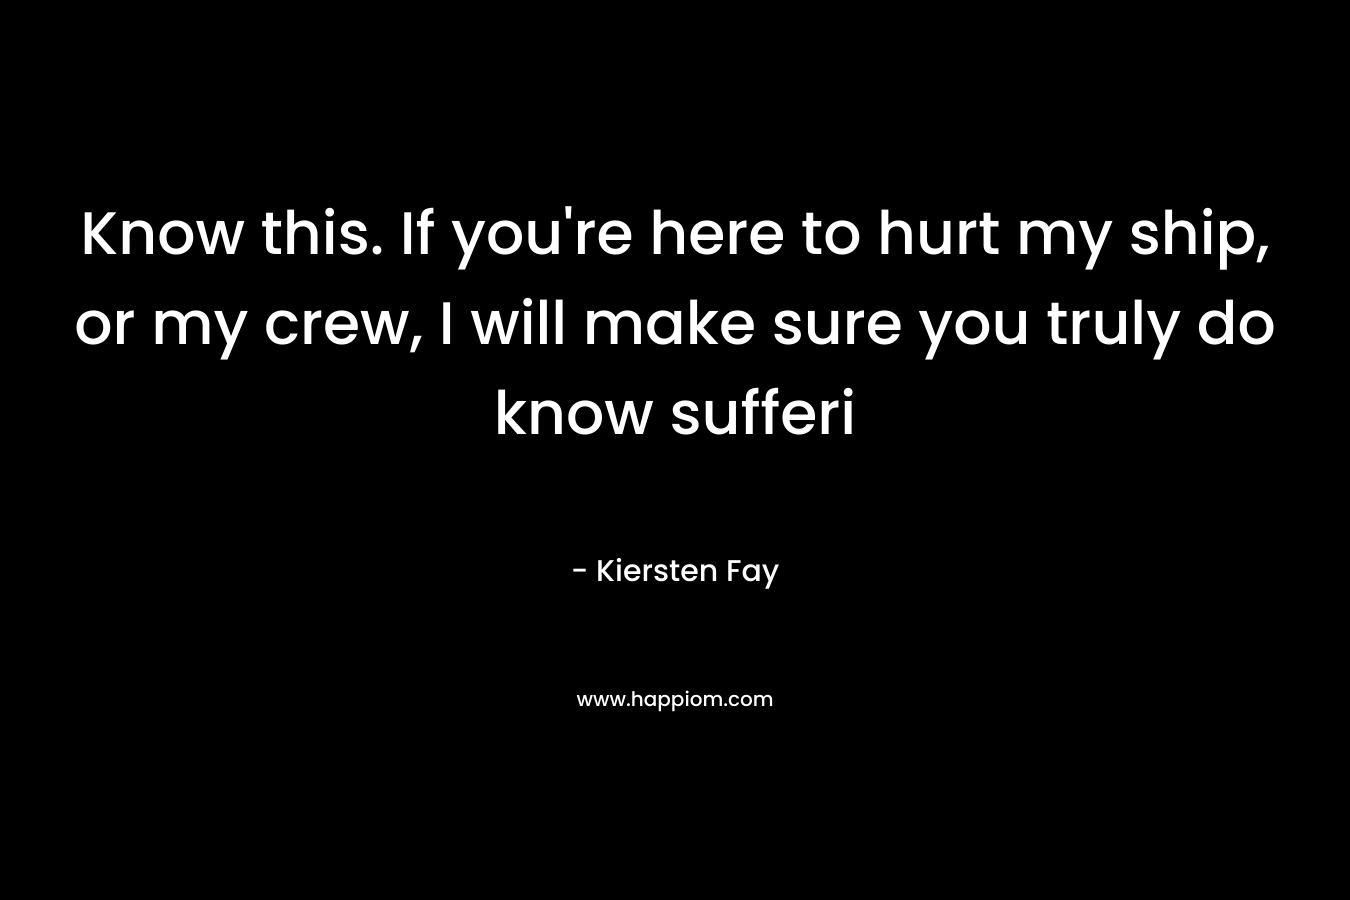 Know this. If you’re here to hurt my ship, or my crew, I will make sure you truly do know sufferi – Kiersten Fay